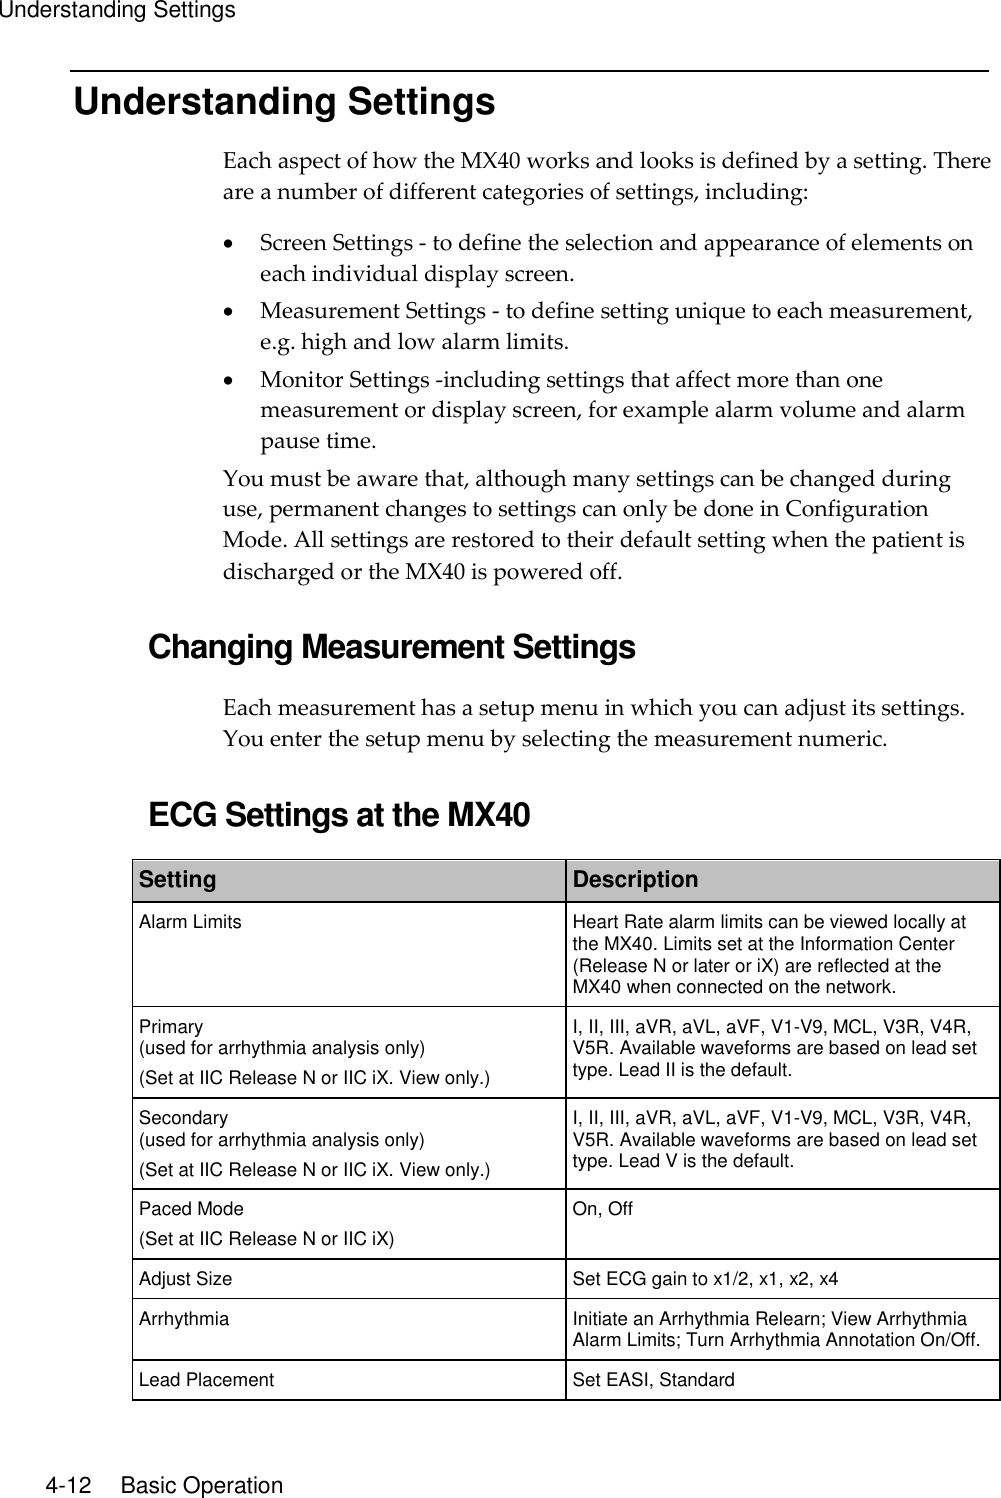 Understanding Settings   4-12    Basic Operation Understanding Settings Each aspect of how the MX40 works and looks is defined by a setting. There are a number of different categories of settings, including:  Screen Settings - to define the selection and appearance of elements on each individual display screen.  Measurement Settings - to define setting unique to each measurement, e.g. high and low alarm limits.  Monitor Settings -including settings that affect more than one measurement or display screen, for example alarm volume and alarm pause time. You must be aware that, although many settings can be changed during use, permanent changes to settings can only be done in Configuration Mode. All settings are restored to their default setting when the patient is discharged or the MX40 is powered off.  Changing Measurement Settings Each measurement has a setup menu in which you can adjust its settings. You enter the setup menu by selecting the measurement numeric.  ECG Settings at the MX40 Setting Description Alarm Limits Heart Rate alarm limits can be viewed locally at the MX40. Limits set at the Information Center (Release N or later or iX) are reflected at the MX40 when connected on the network. Primary (used for arrhythmia analysis only) (Set at IIC Release N or IIC iX. View only.) I, II, III, aVR, aVL, aVF, V1-V9, MCL, V3R, V4R, V5R. Available waveforms are based on lead set type. Lead II is the default. Secondary (used for arrhythmia analysis only) (Set at IIC Release N or IIC iX. View only.) I, II, III, aVR, aVL, aVF, V1-V9, MCL, V3R, V4R, V5R. Available waveforms are based on lead set type. Lead V is the default. Paced Mode (Set at IIC Release N or IIC iX) On, Off Adjust Size Set ECG gain to x1/2, x1, x2, x4 Arrhythmia Initiate an Arrhythmia Relearn; View Arrhythmia Alarm Limits; Turn Arrhythmia Annotation On/Off. Lead Placement Set EASI, Standard 